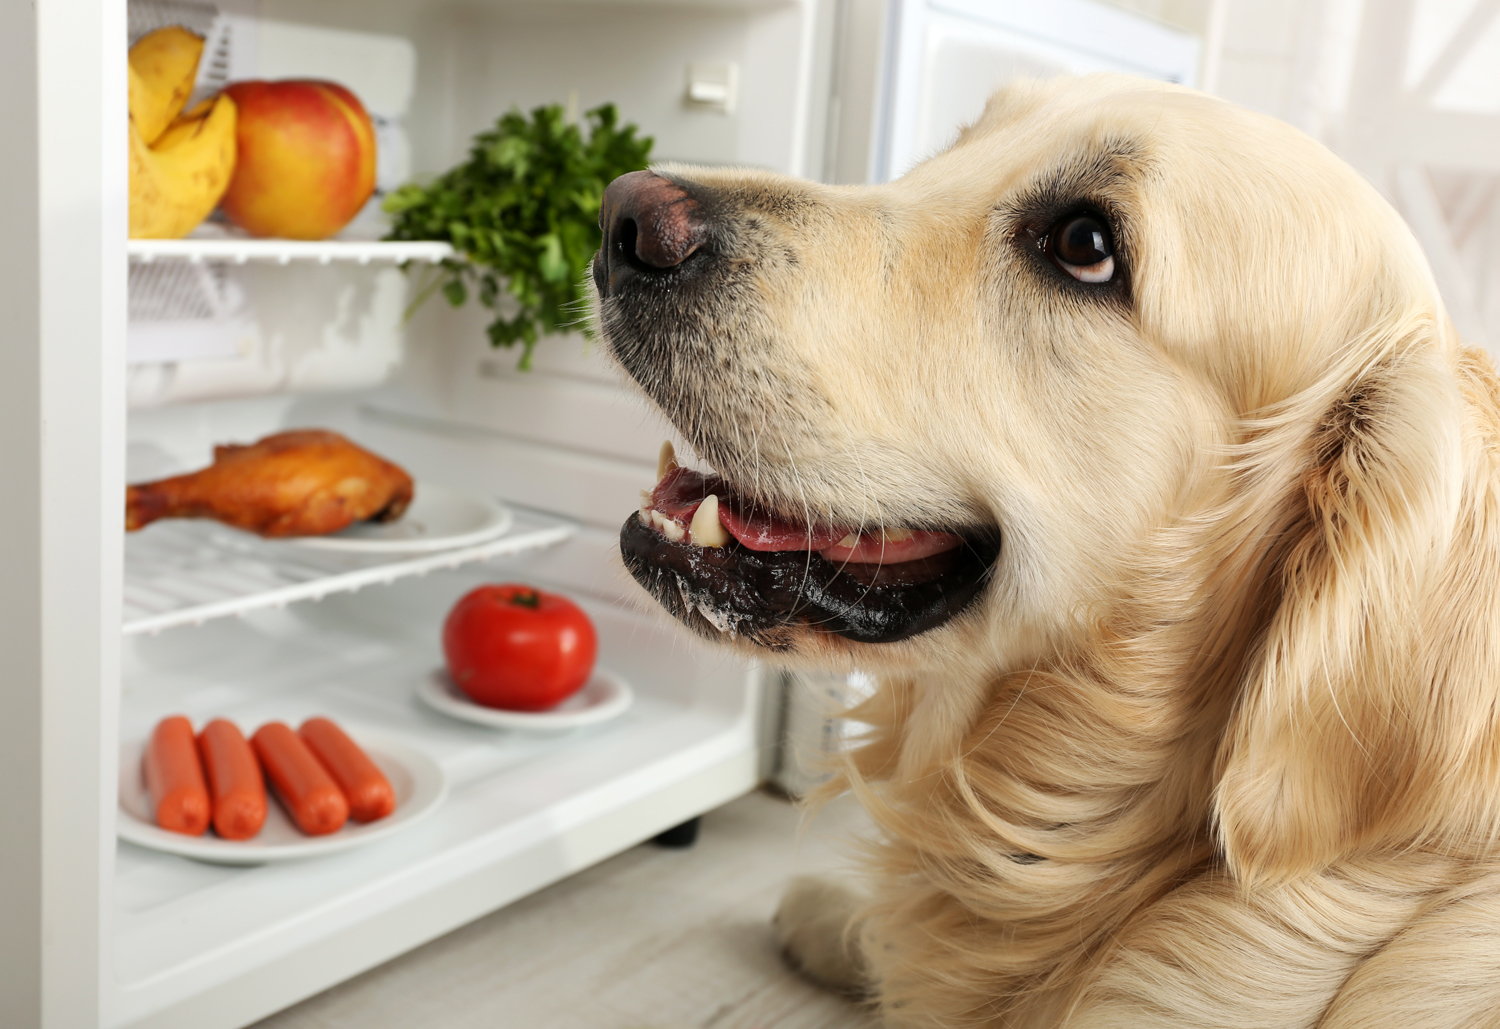 Dog Next to Fridge - Fat pets are unhealthy pets.